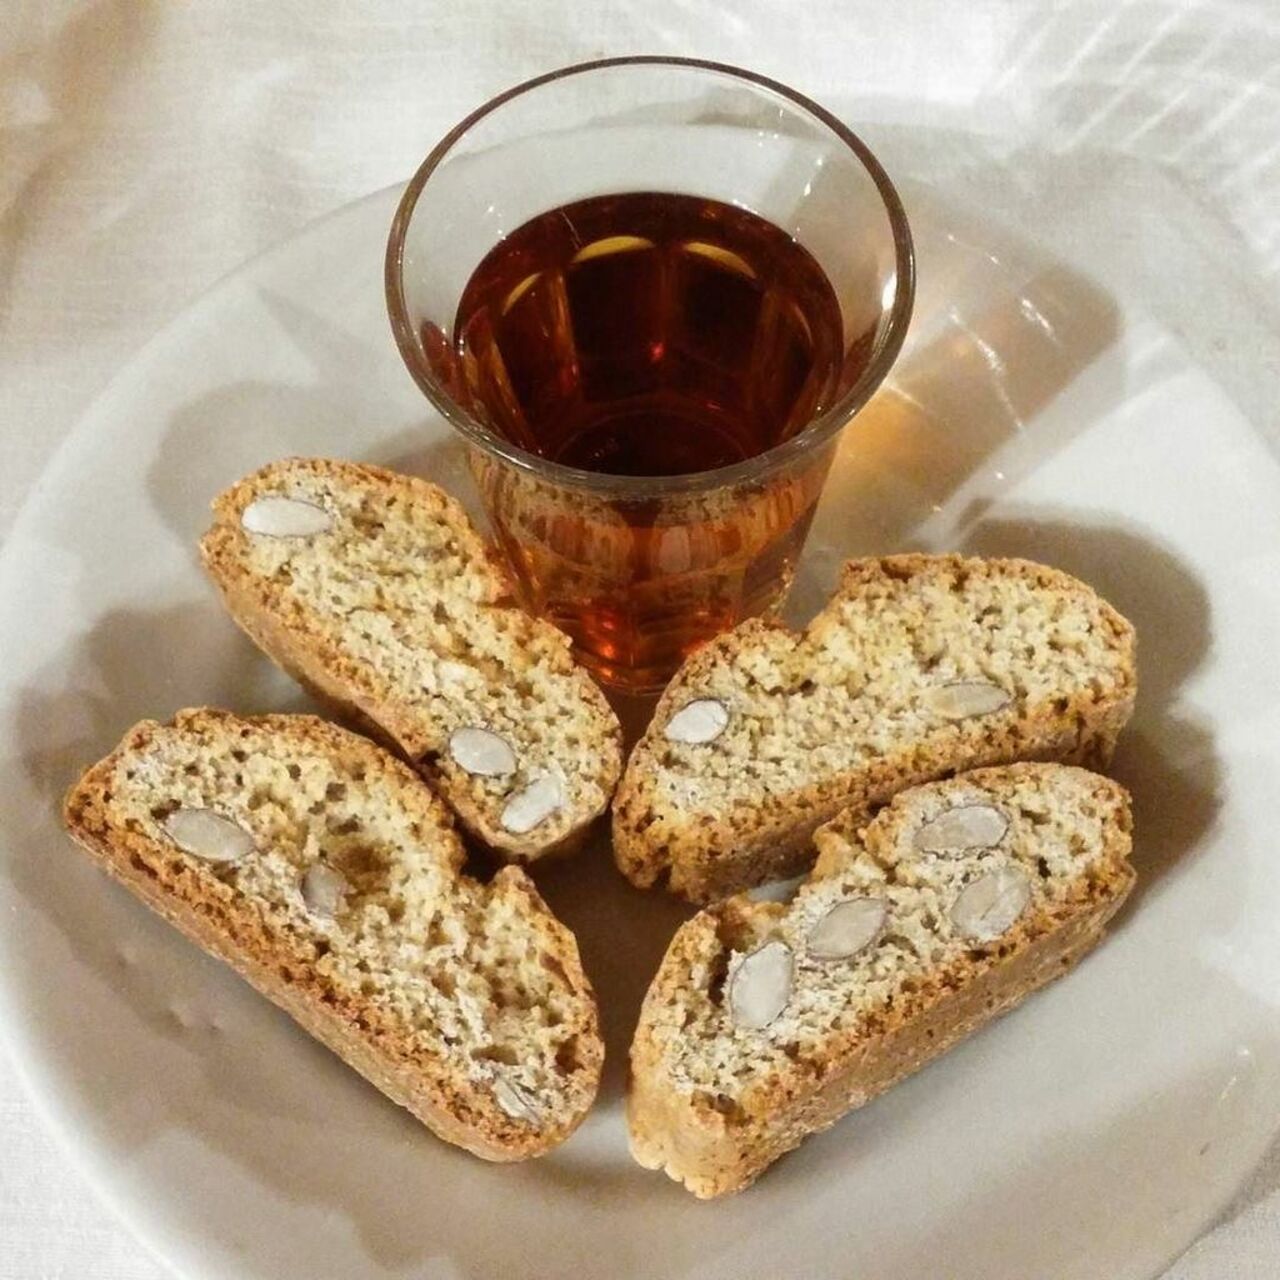 Love is everywhere like this #cantucci and #vinsanto thath is a typical #tuscany dessert #tuscanygram #tuscanybuzz … https://t.co/bSV0VTATux